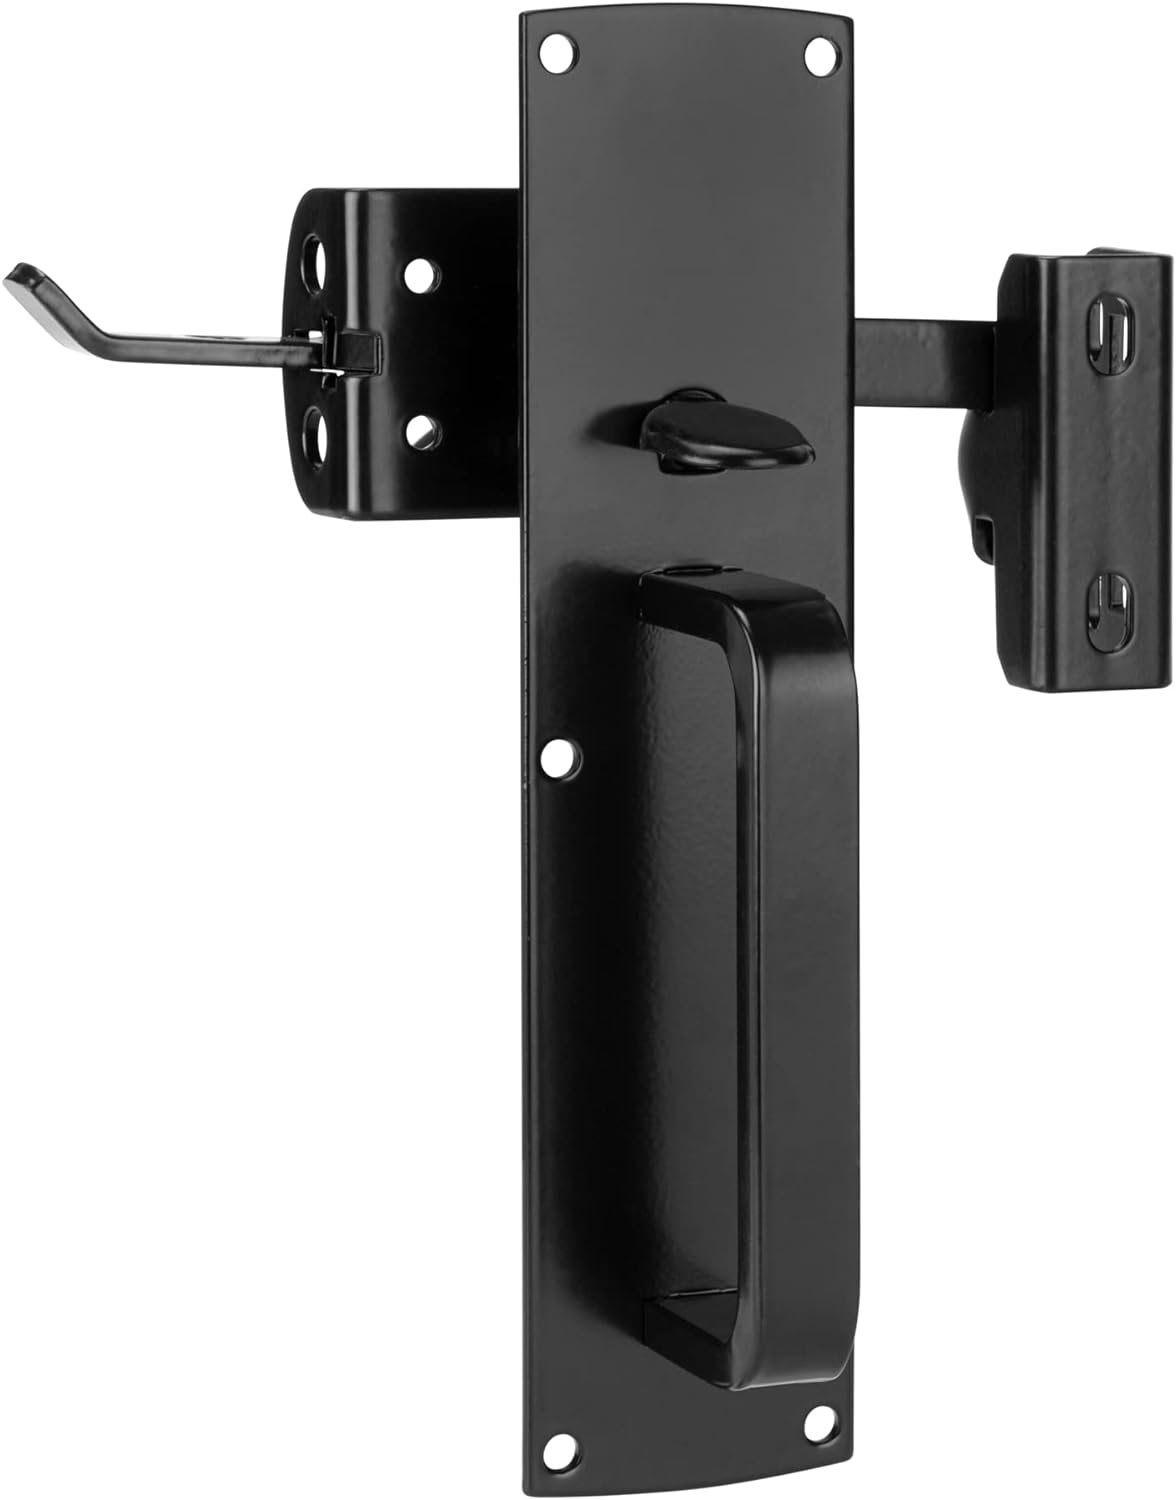 SANKINS Thumb Gate Latch Hardware for Wooden Fence Heavy Duty, Self Locking Fence Latch Kit with Handle, Door Latch Gate Lock kit for W